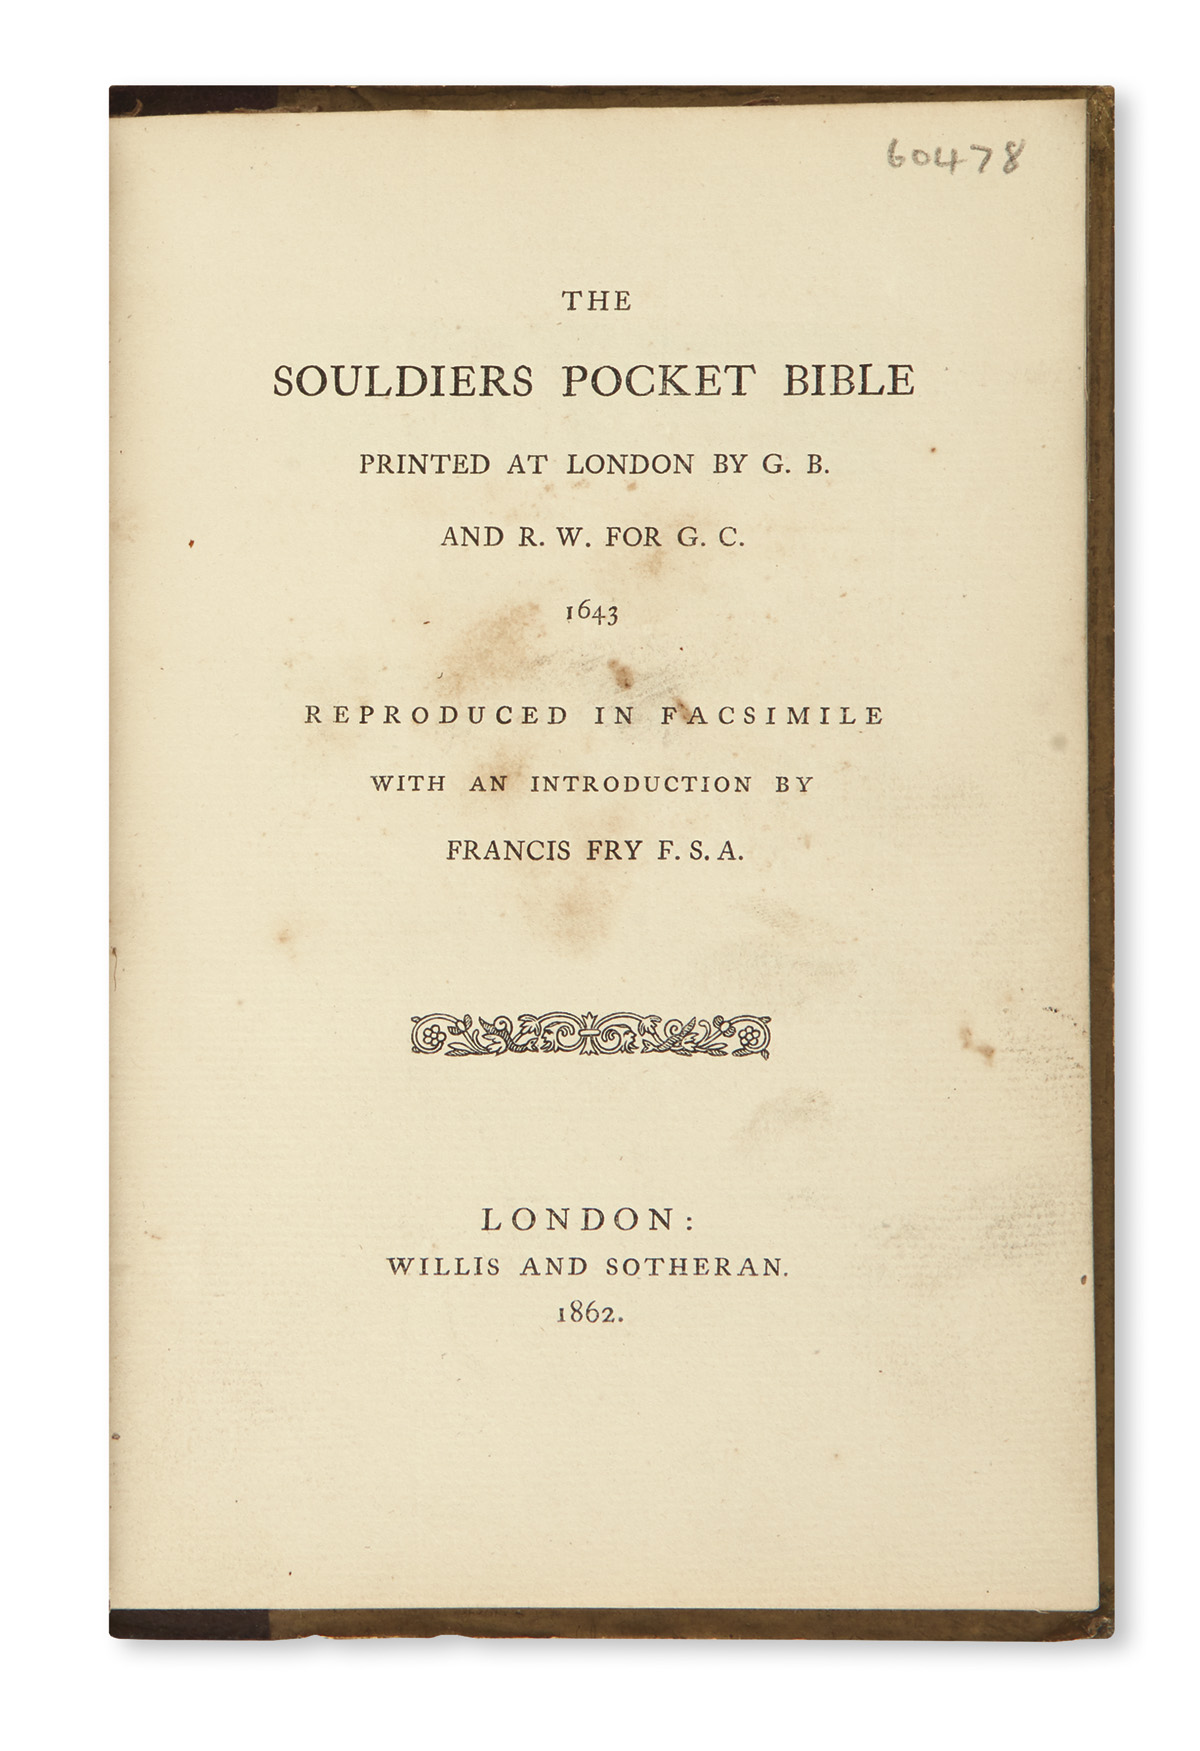 BIBLE IN ENGLISH.  The Souldiers Pocket Bible printed at London . . . 1643 . . . with an Introduction by Francis Fry F. S. A.  1862